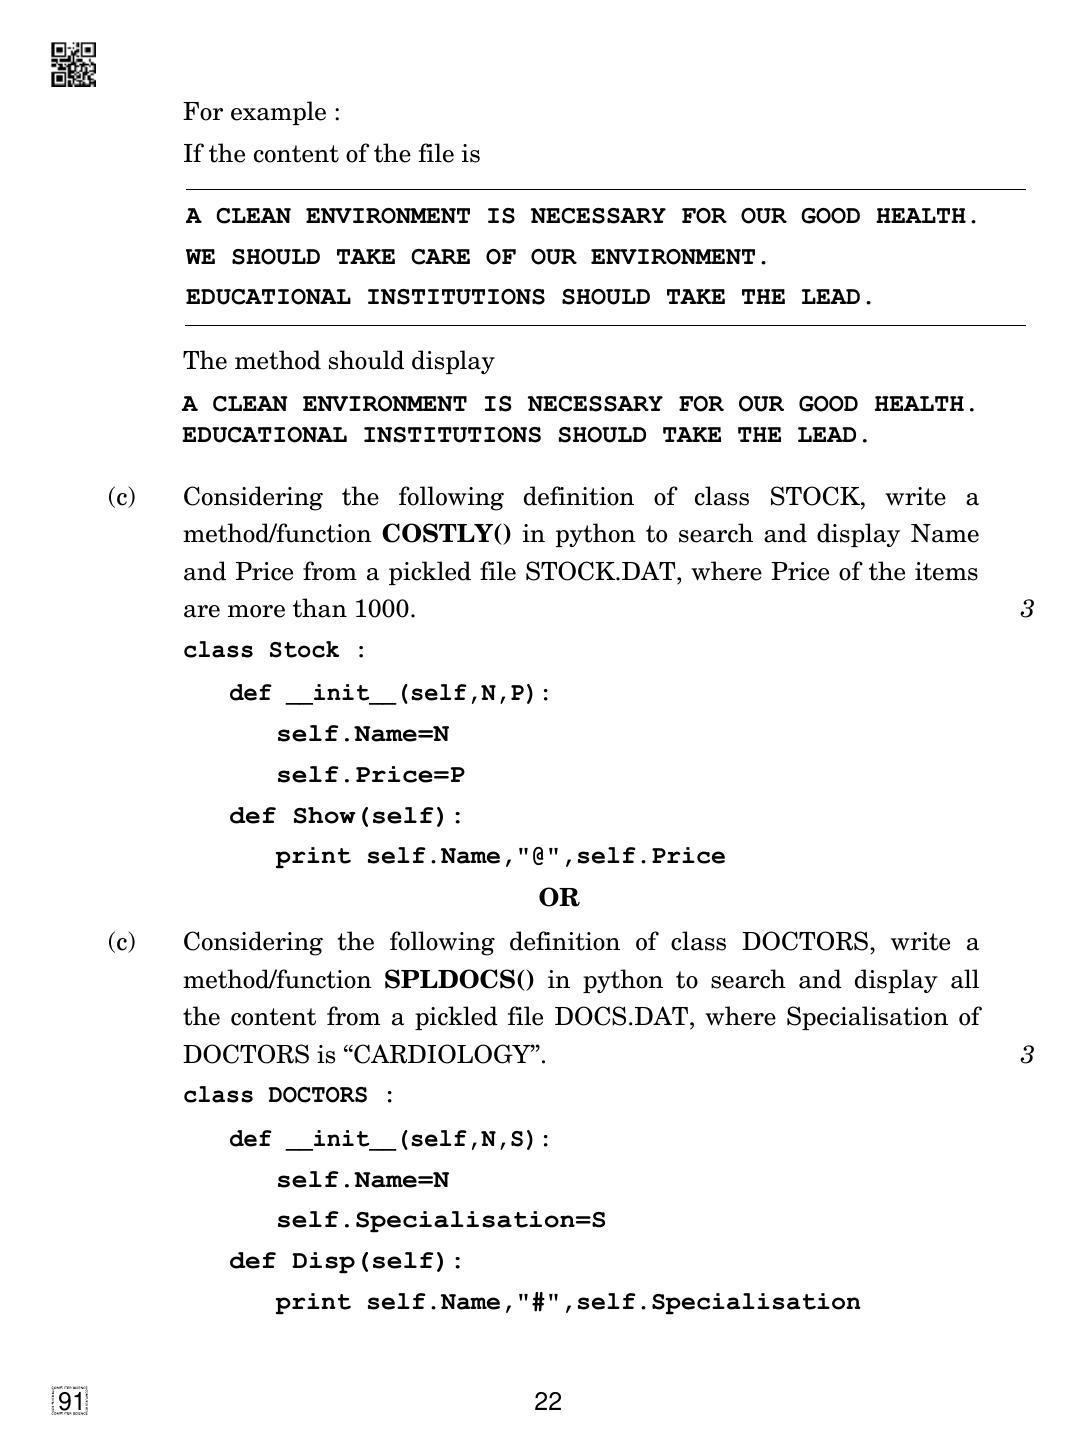 CBSE Class 12 91 Computer Science 2019 Question Paper - Page 22